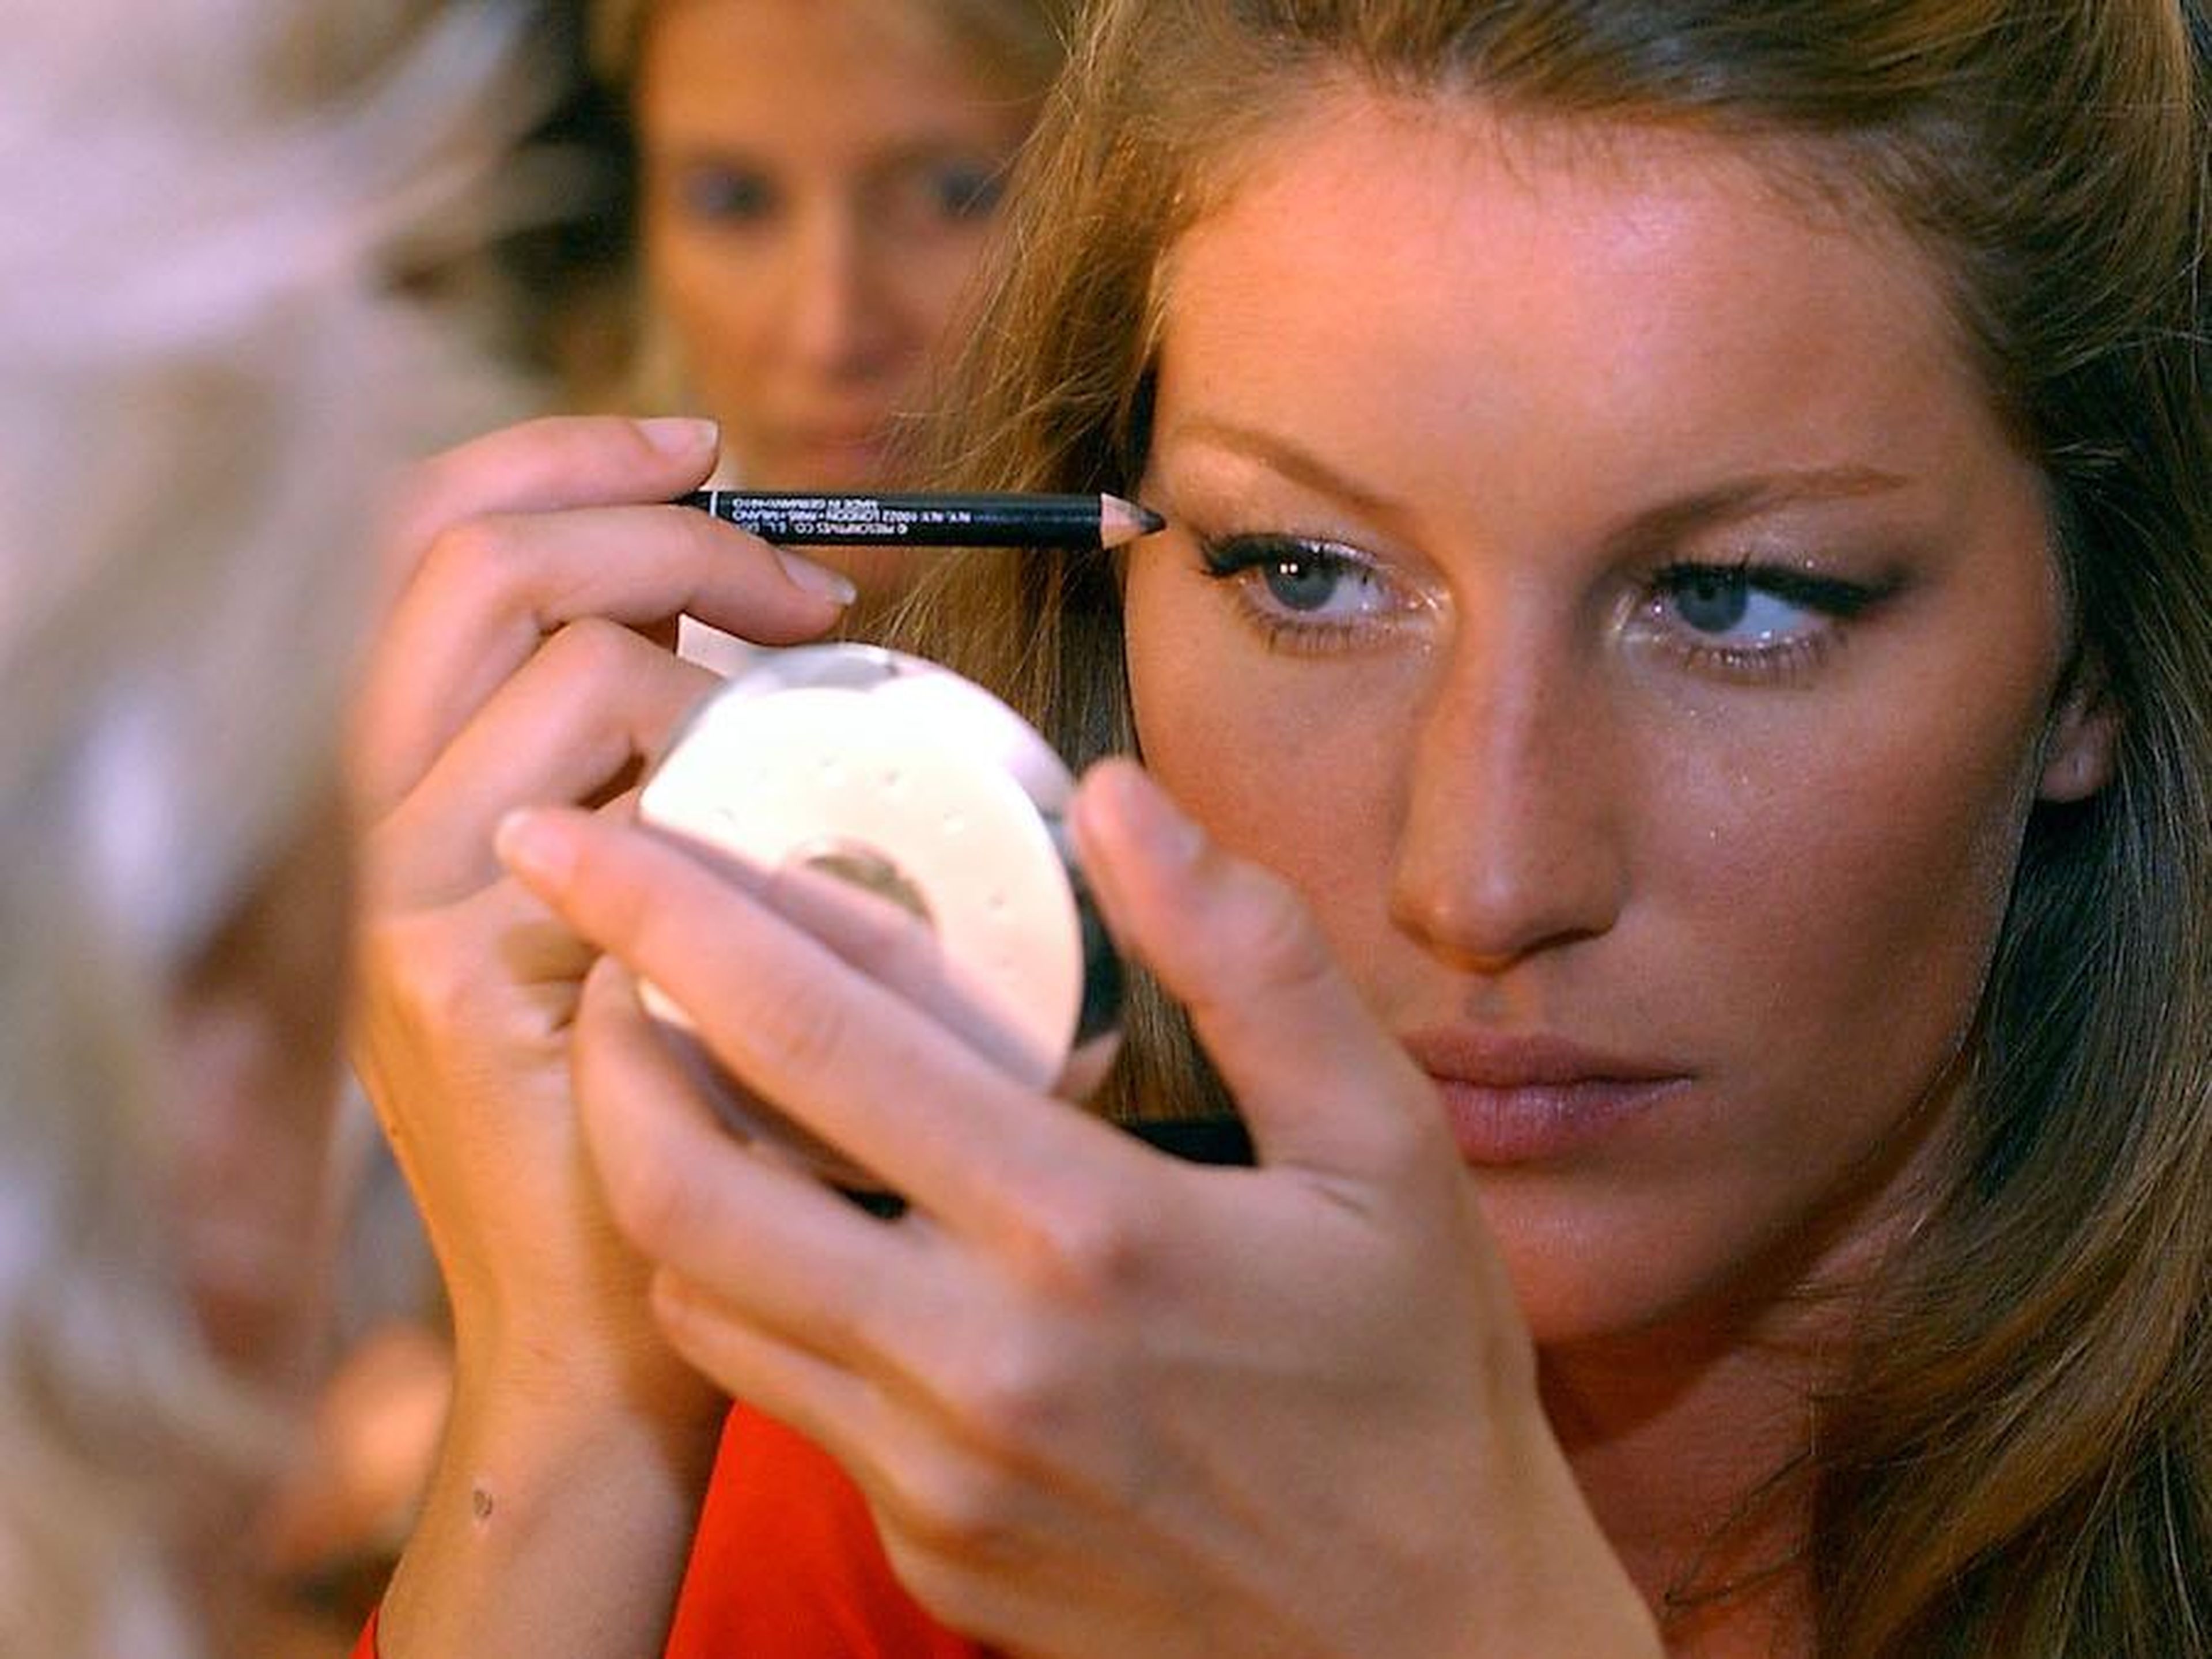 The runway shows became more lavish. In 2000, model Gisele Bündchen walked the runway in what was then the most expensive item of lingerie ever created, a $15 million diamond-and-ruby-encrusted 'Fantasy Bra.'